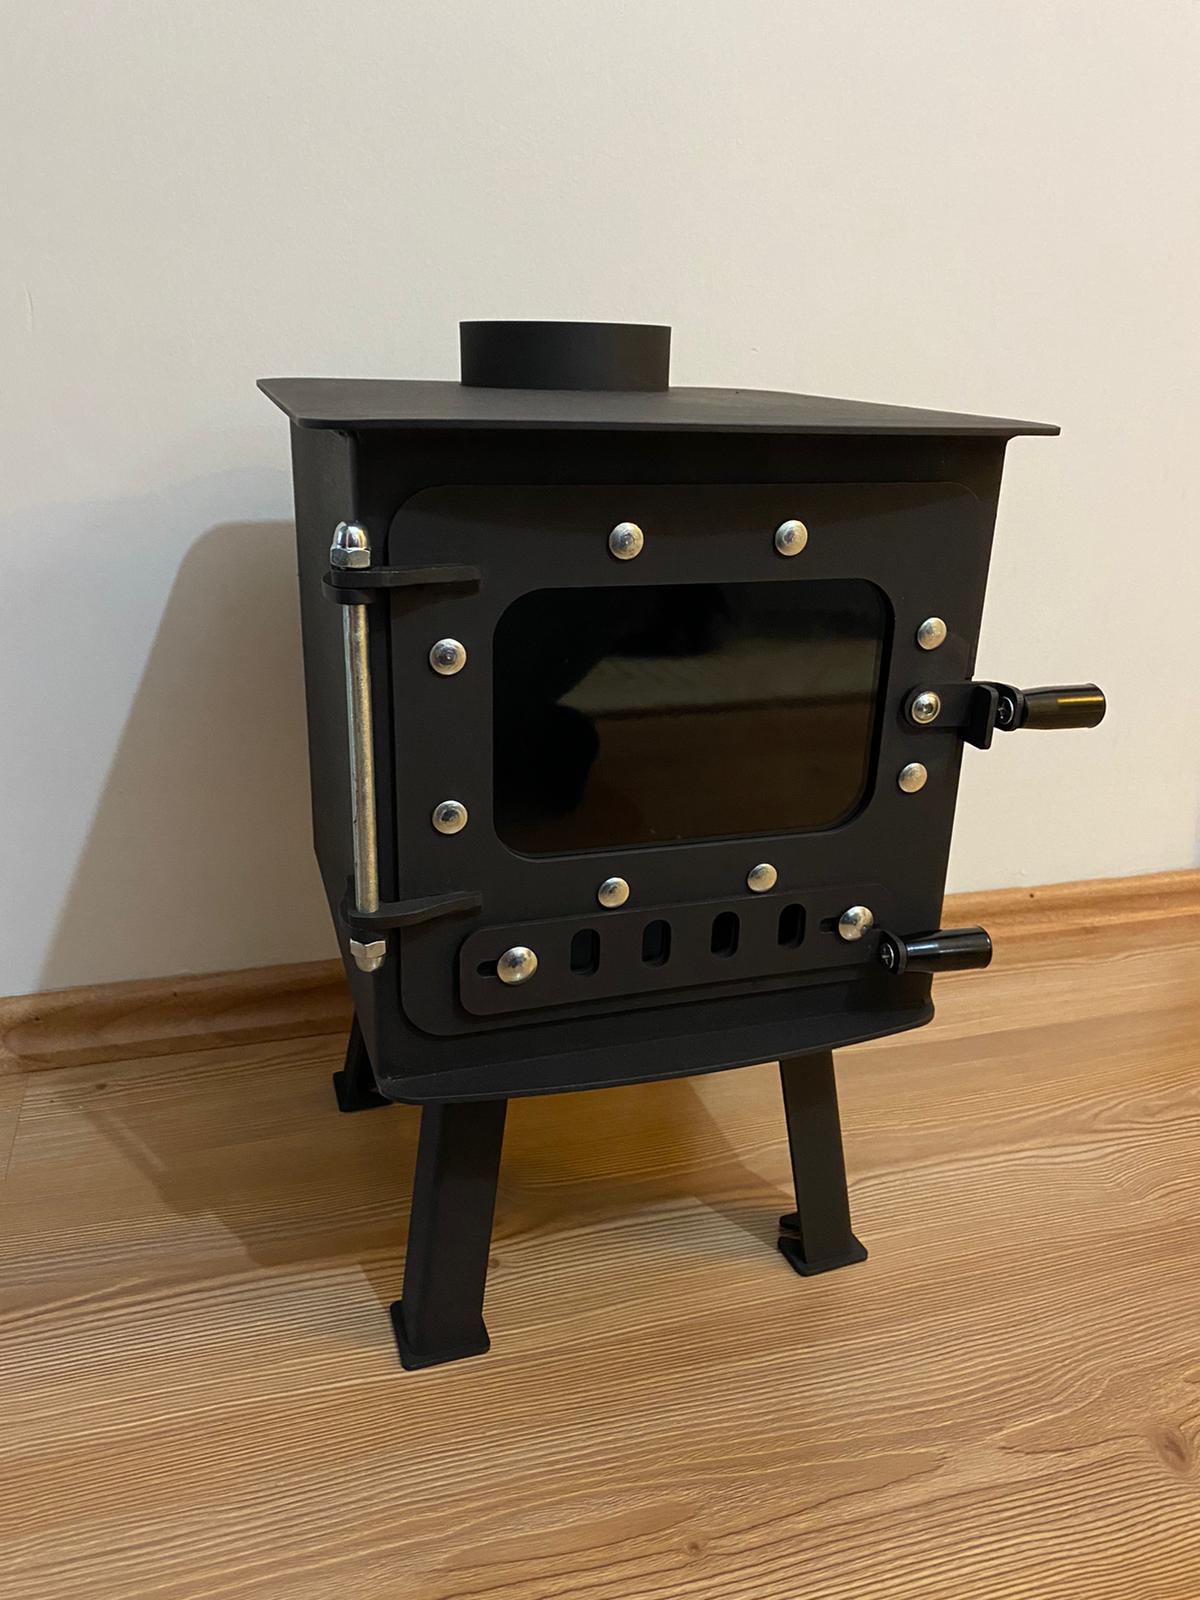 Cute Tiny Wood Stove, Camping, Bunkie Wood Stove, Campervan Stove, Caravan,  Cabin Wood Stove, Tiny House Stove, Tent Stove, Outdoor Stove